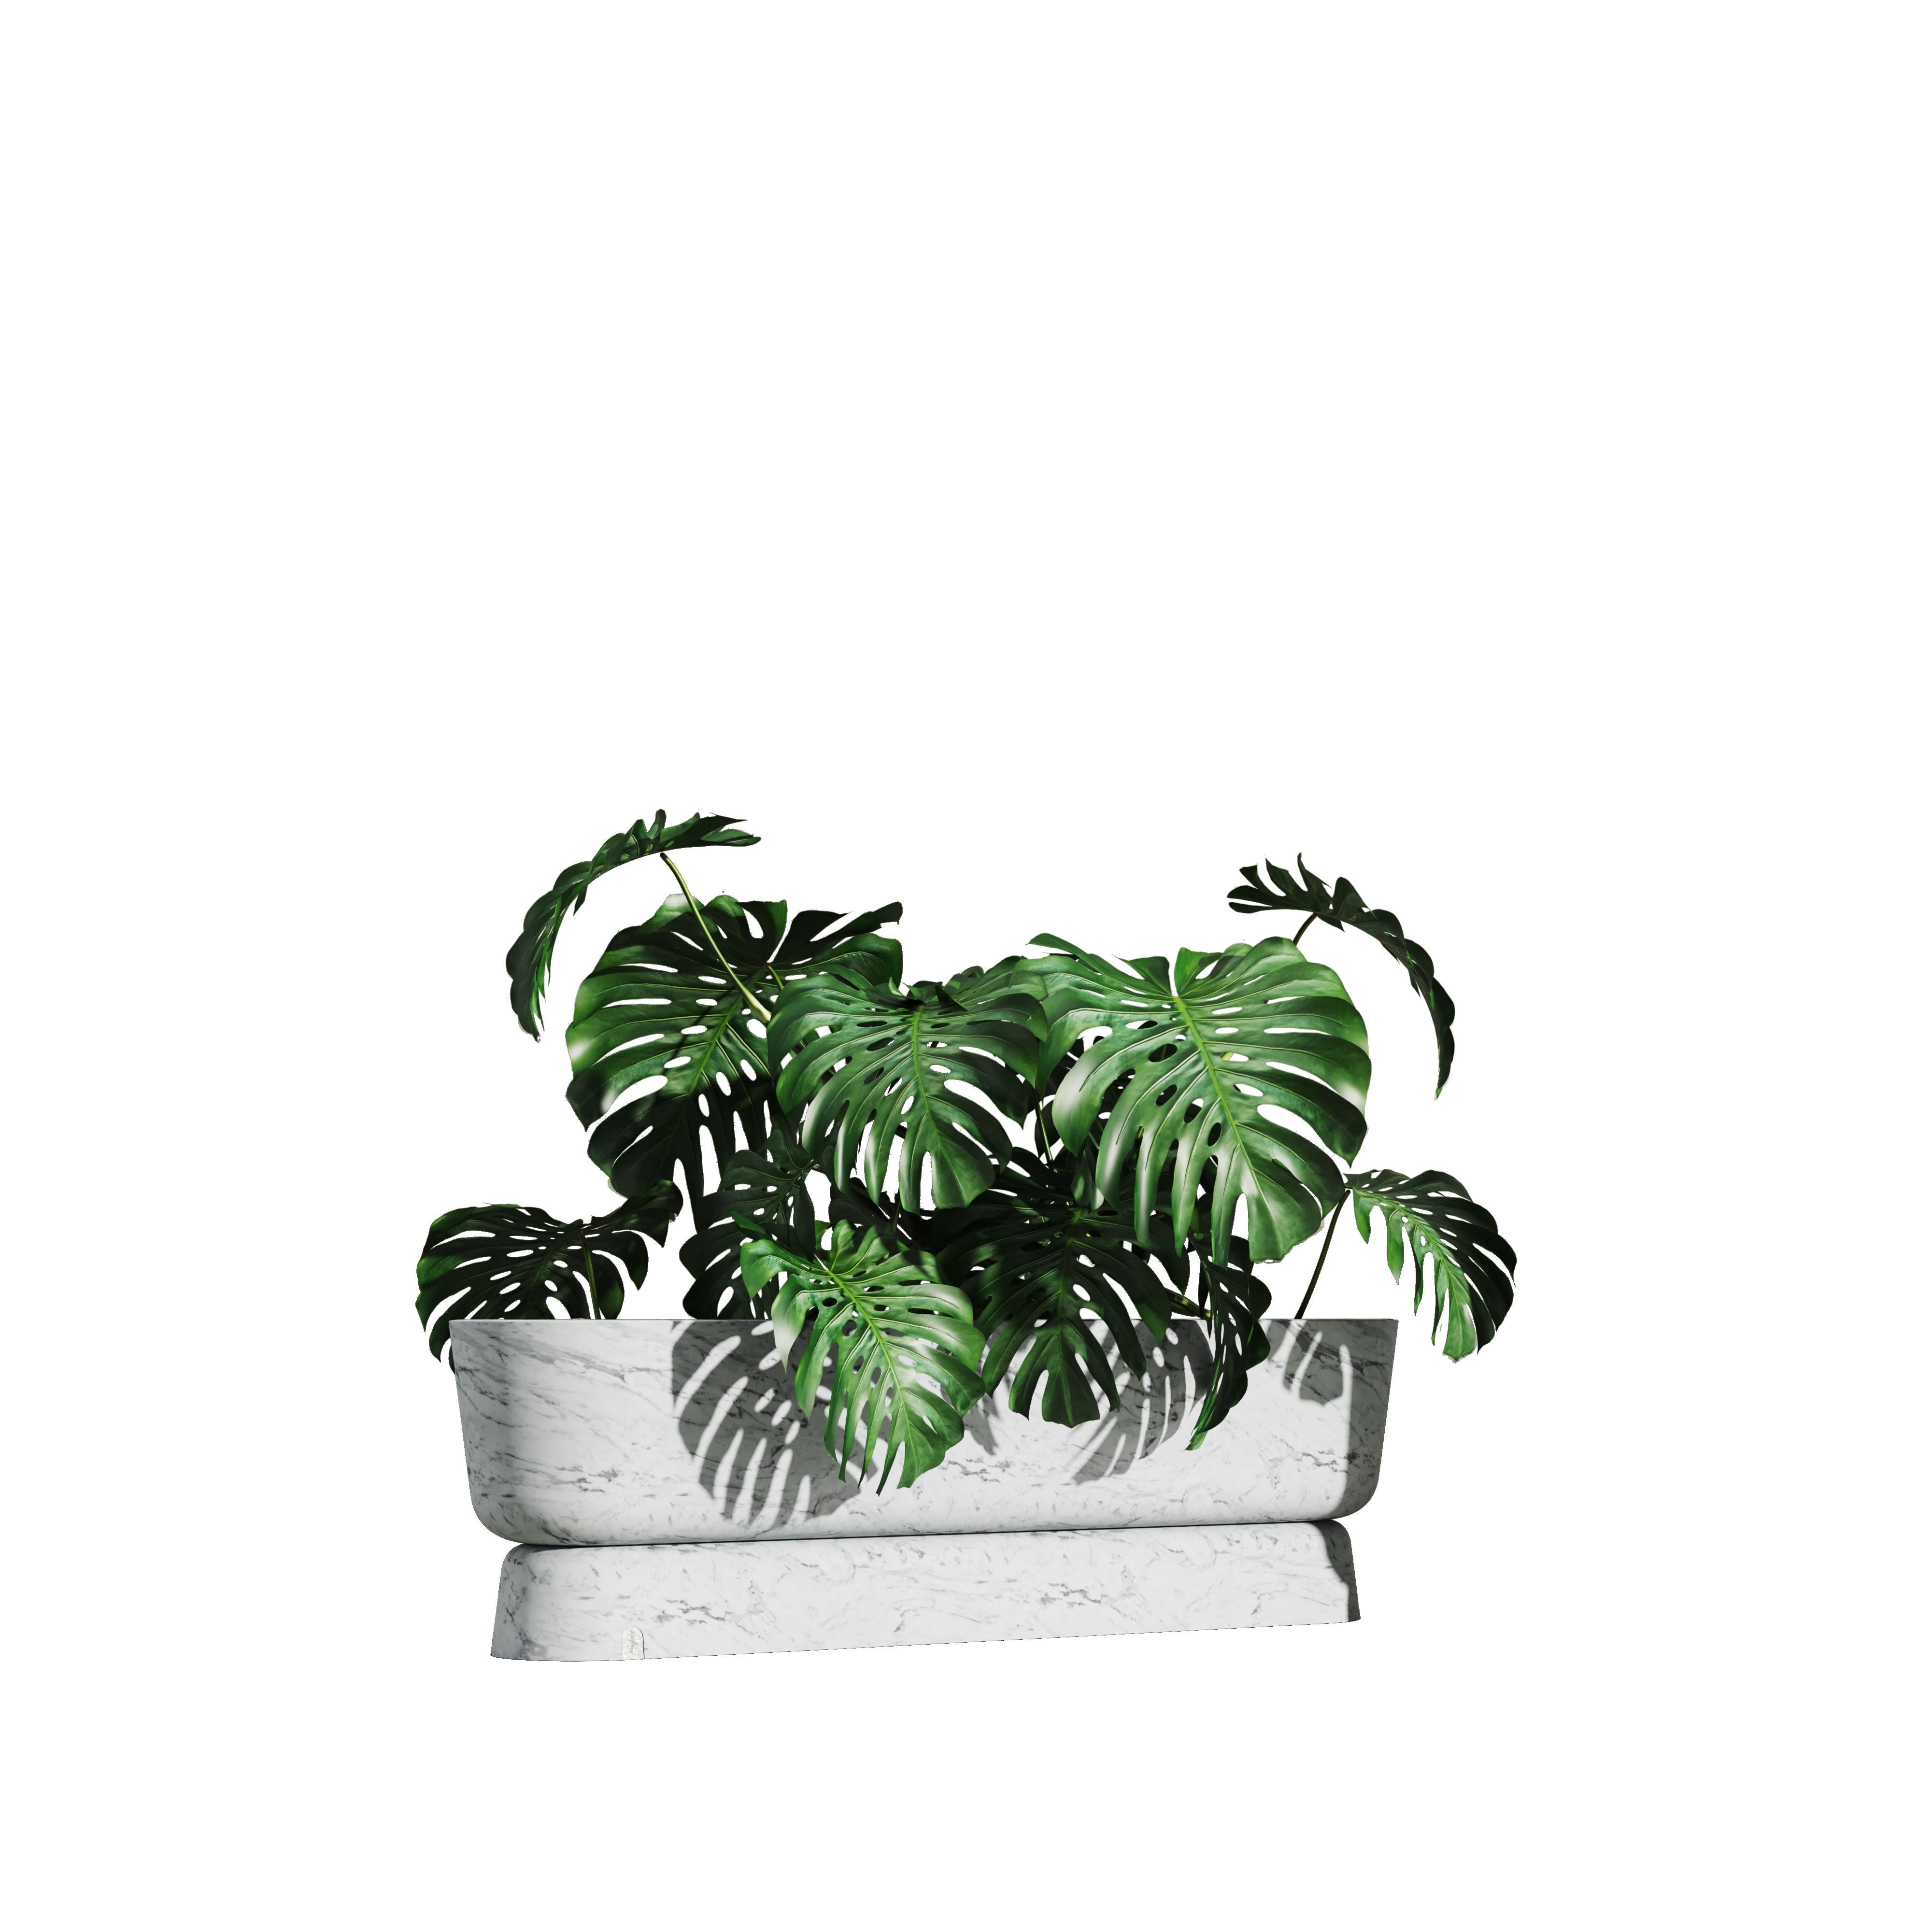 By believing that one of the things we share with our clients is the ambition of finding happiness outdoors, we developed the Eden planters. Nothing transmits more life than nature, and that's the main goal of this piece - to awaken the life and